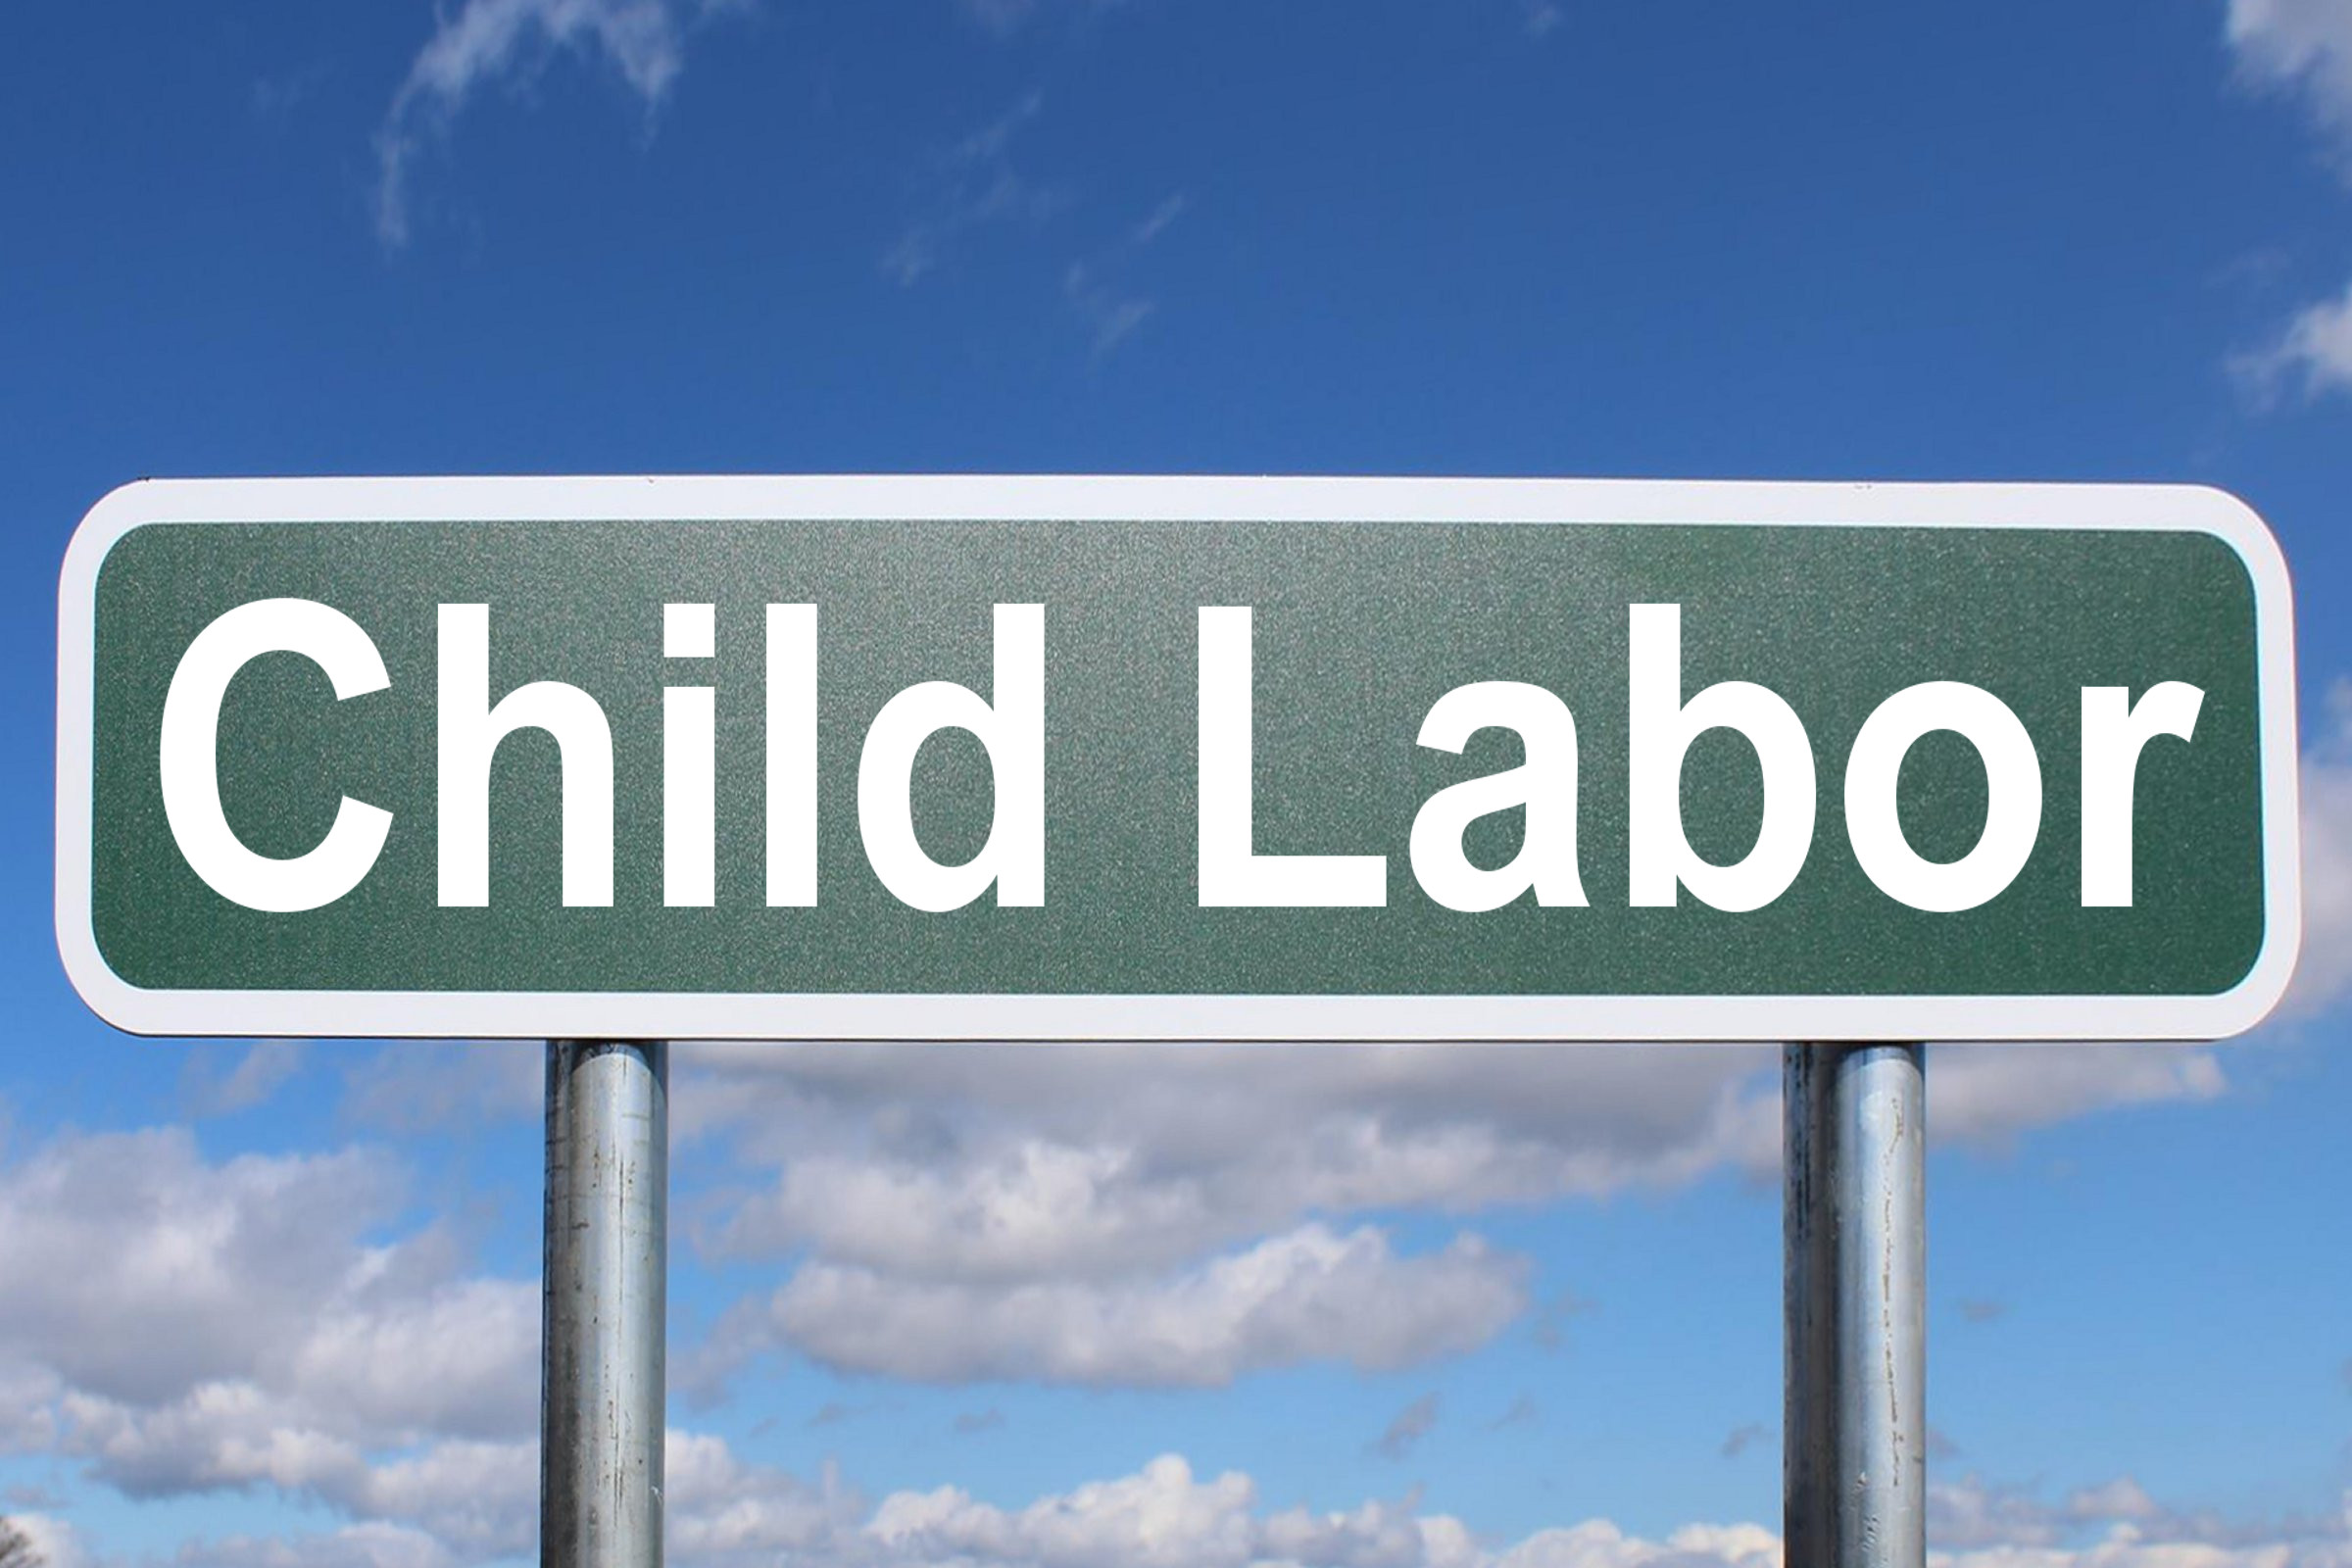 stop child labor quotes